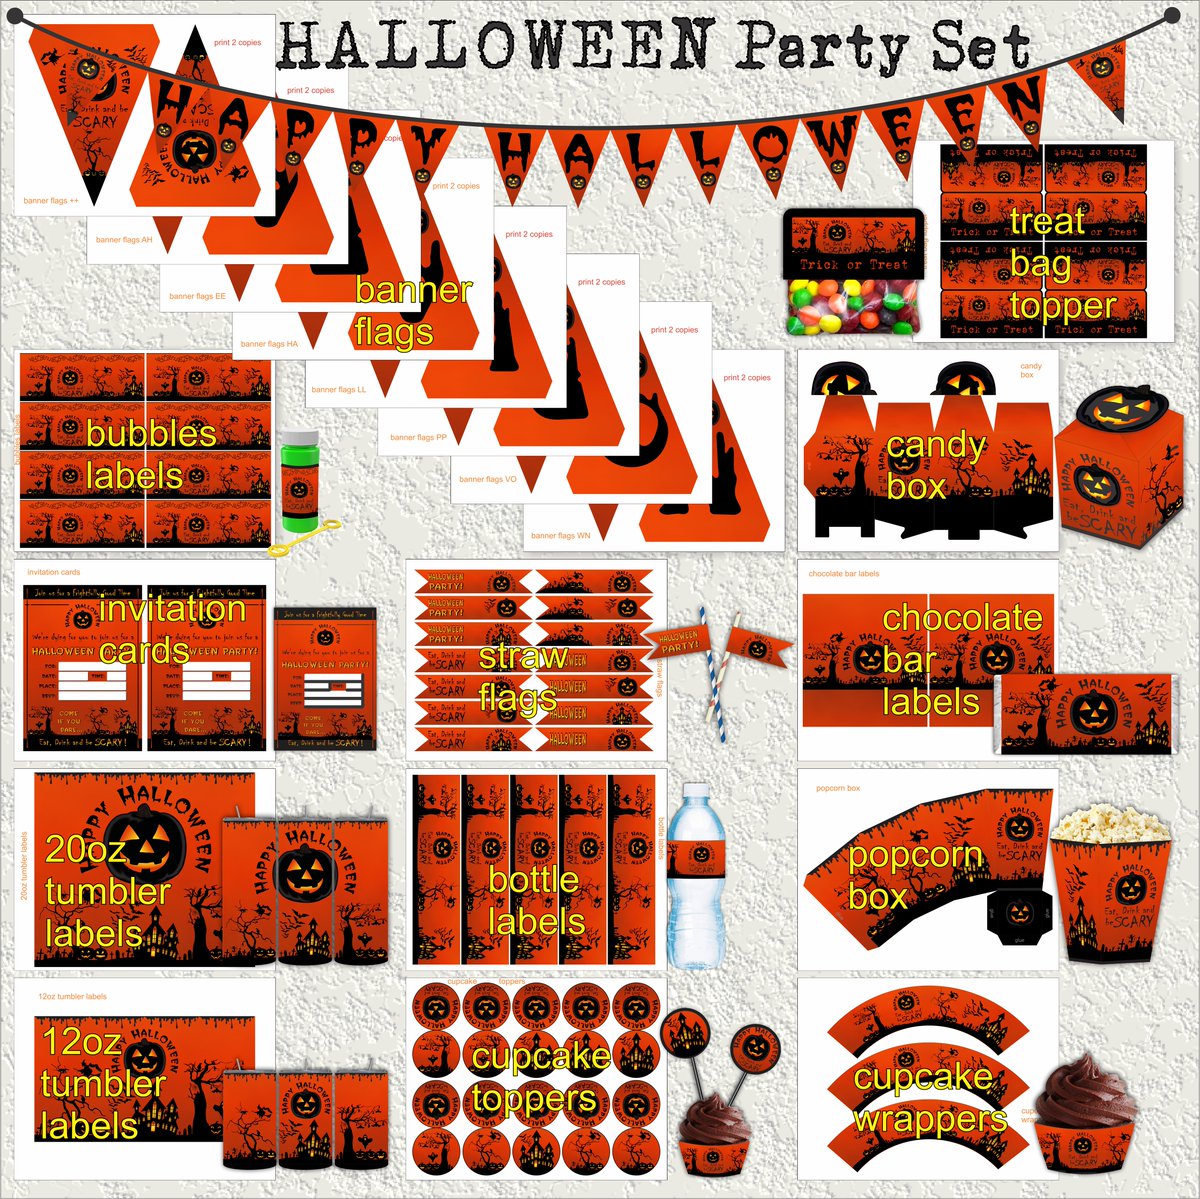 HALLOWEEN Party Set by GGGsign 
. 
gggsign.etsy.com 
. 
etsy.com/listing/158091… 
. 
#halloween #happyhalloween #etsy #etsyshop #bestofetsy #etsystore #halloweenparty #halloweennight #halloweenpartyideas #halloweenpartydecor #halloweenpartybundle #halloweenseason #etsystore